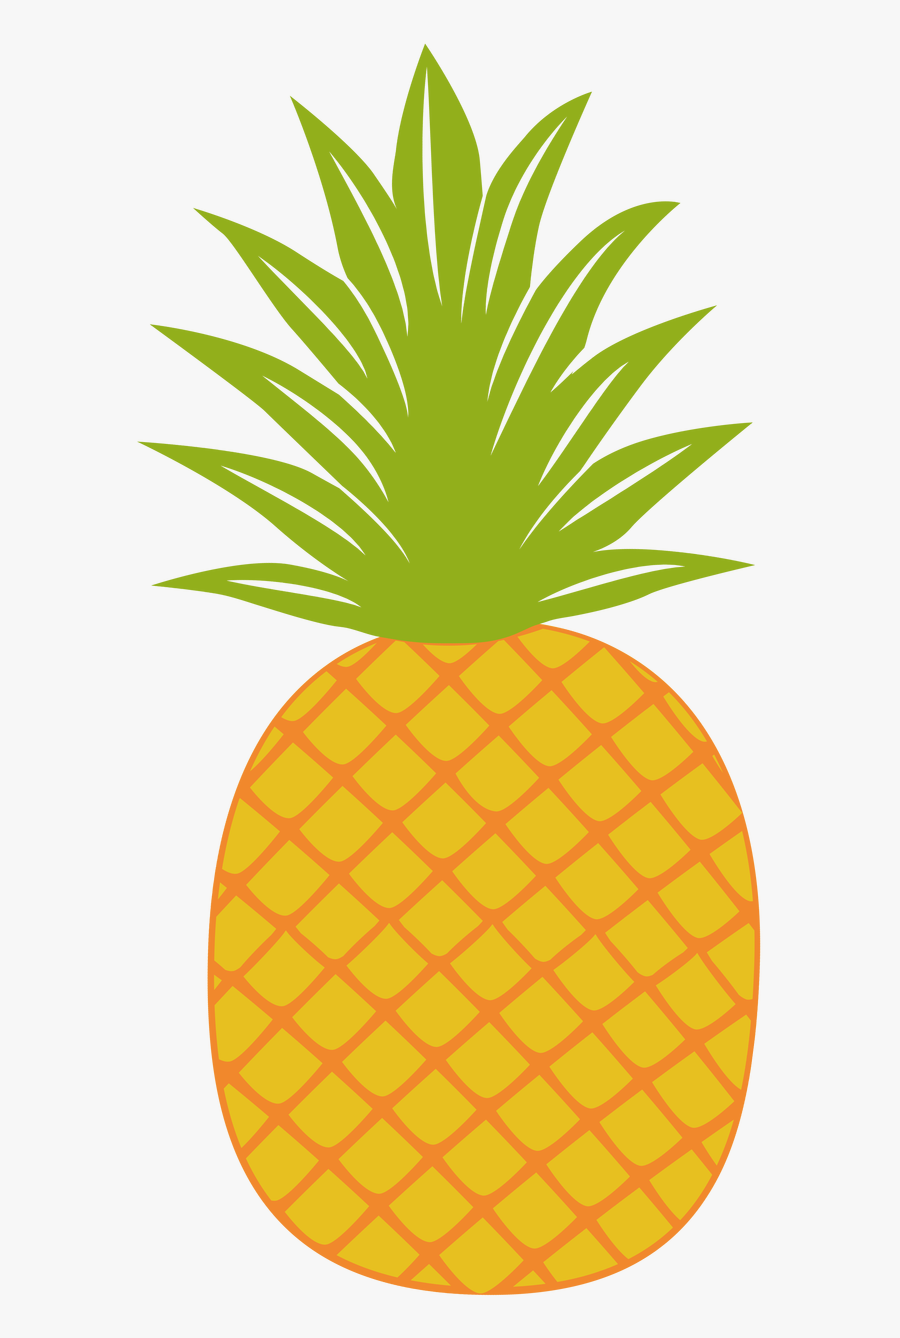 Download Pineapple Clipart Fancy - Cut File Pineapple Svg , Free ...